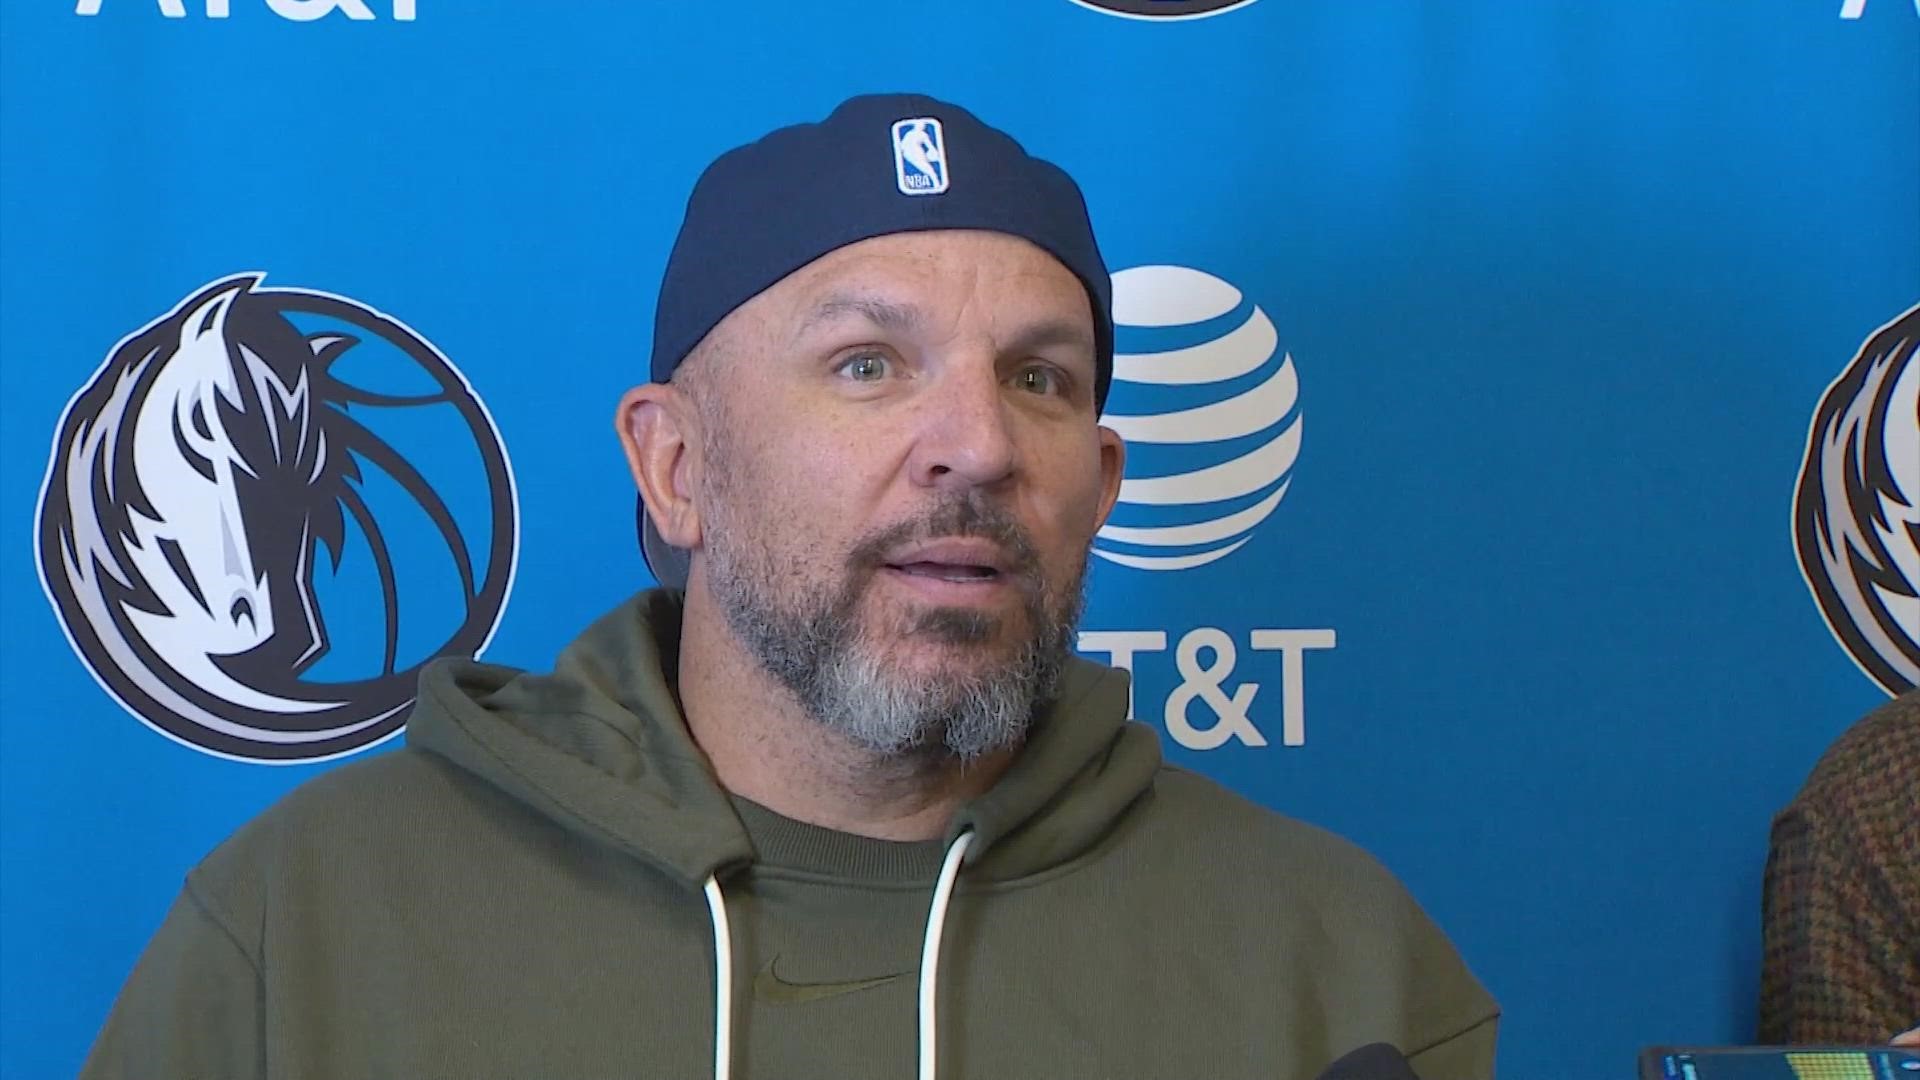 While talking to the media Thursday, Mavs coach Jason Kidd didn't provide an update on Luka Doncic's playing status, but said that it "looks like he's improving."